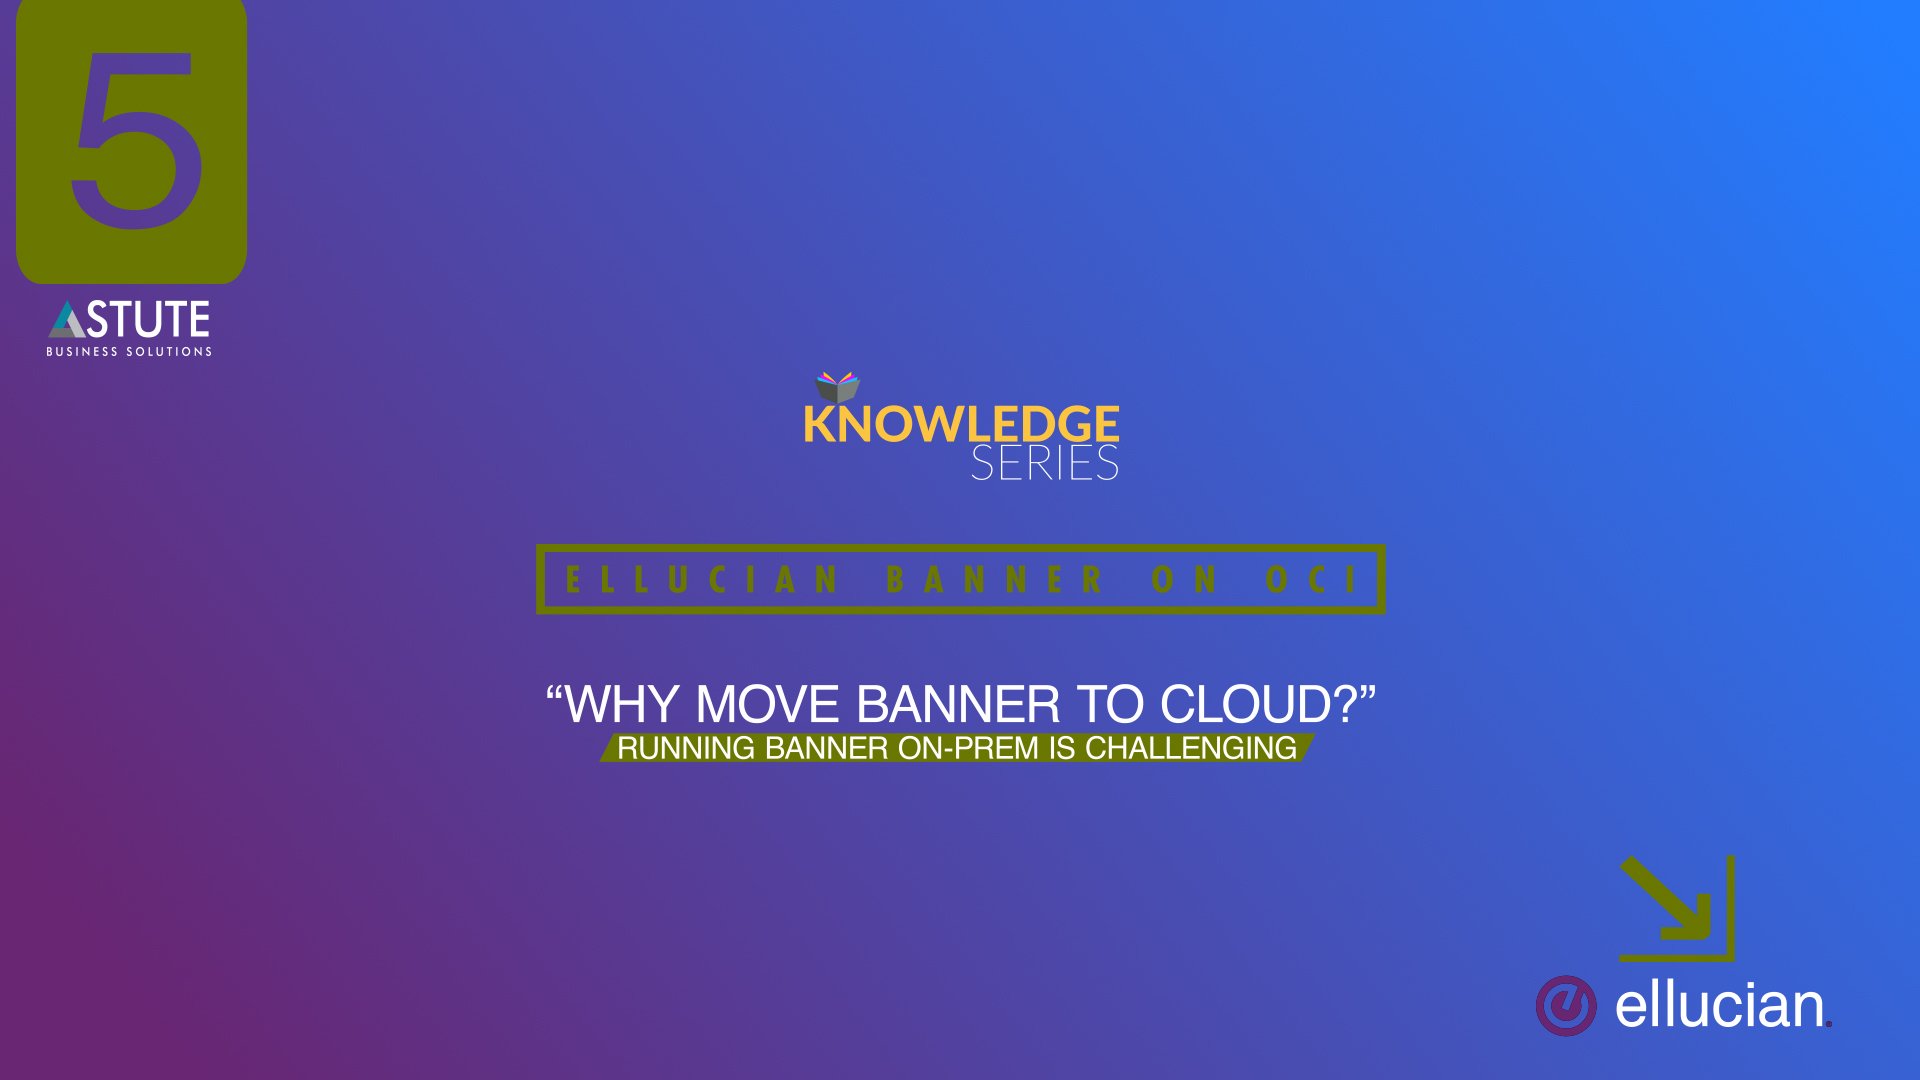 #5 Ellucian _Why move Banner to cloud_- Running Banner On-Prem is Challenging